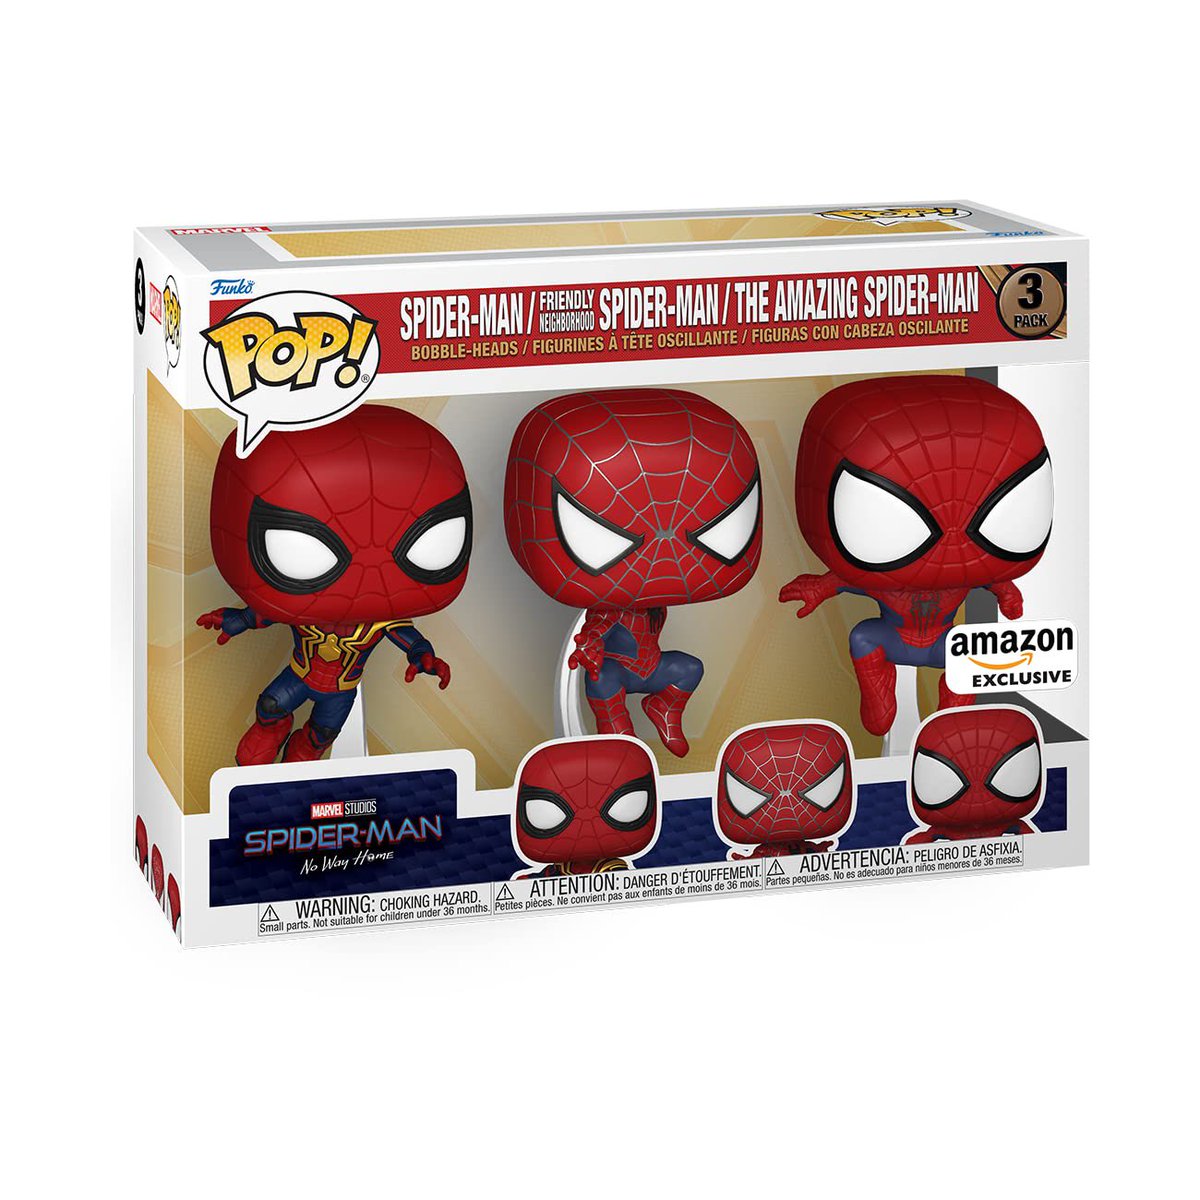 Restock - Amazon exclusive Spider-Man 3-pack is back up!
#Ad #Marvel #SpiderMan
.
https://t.co/6krzXJrP63 https://t.co/7iD1v3ipLT